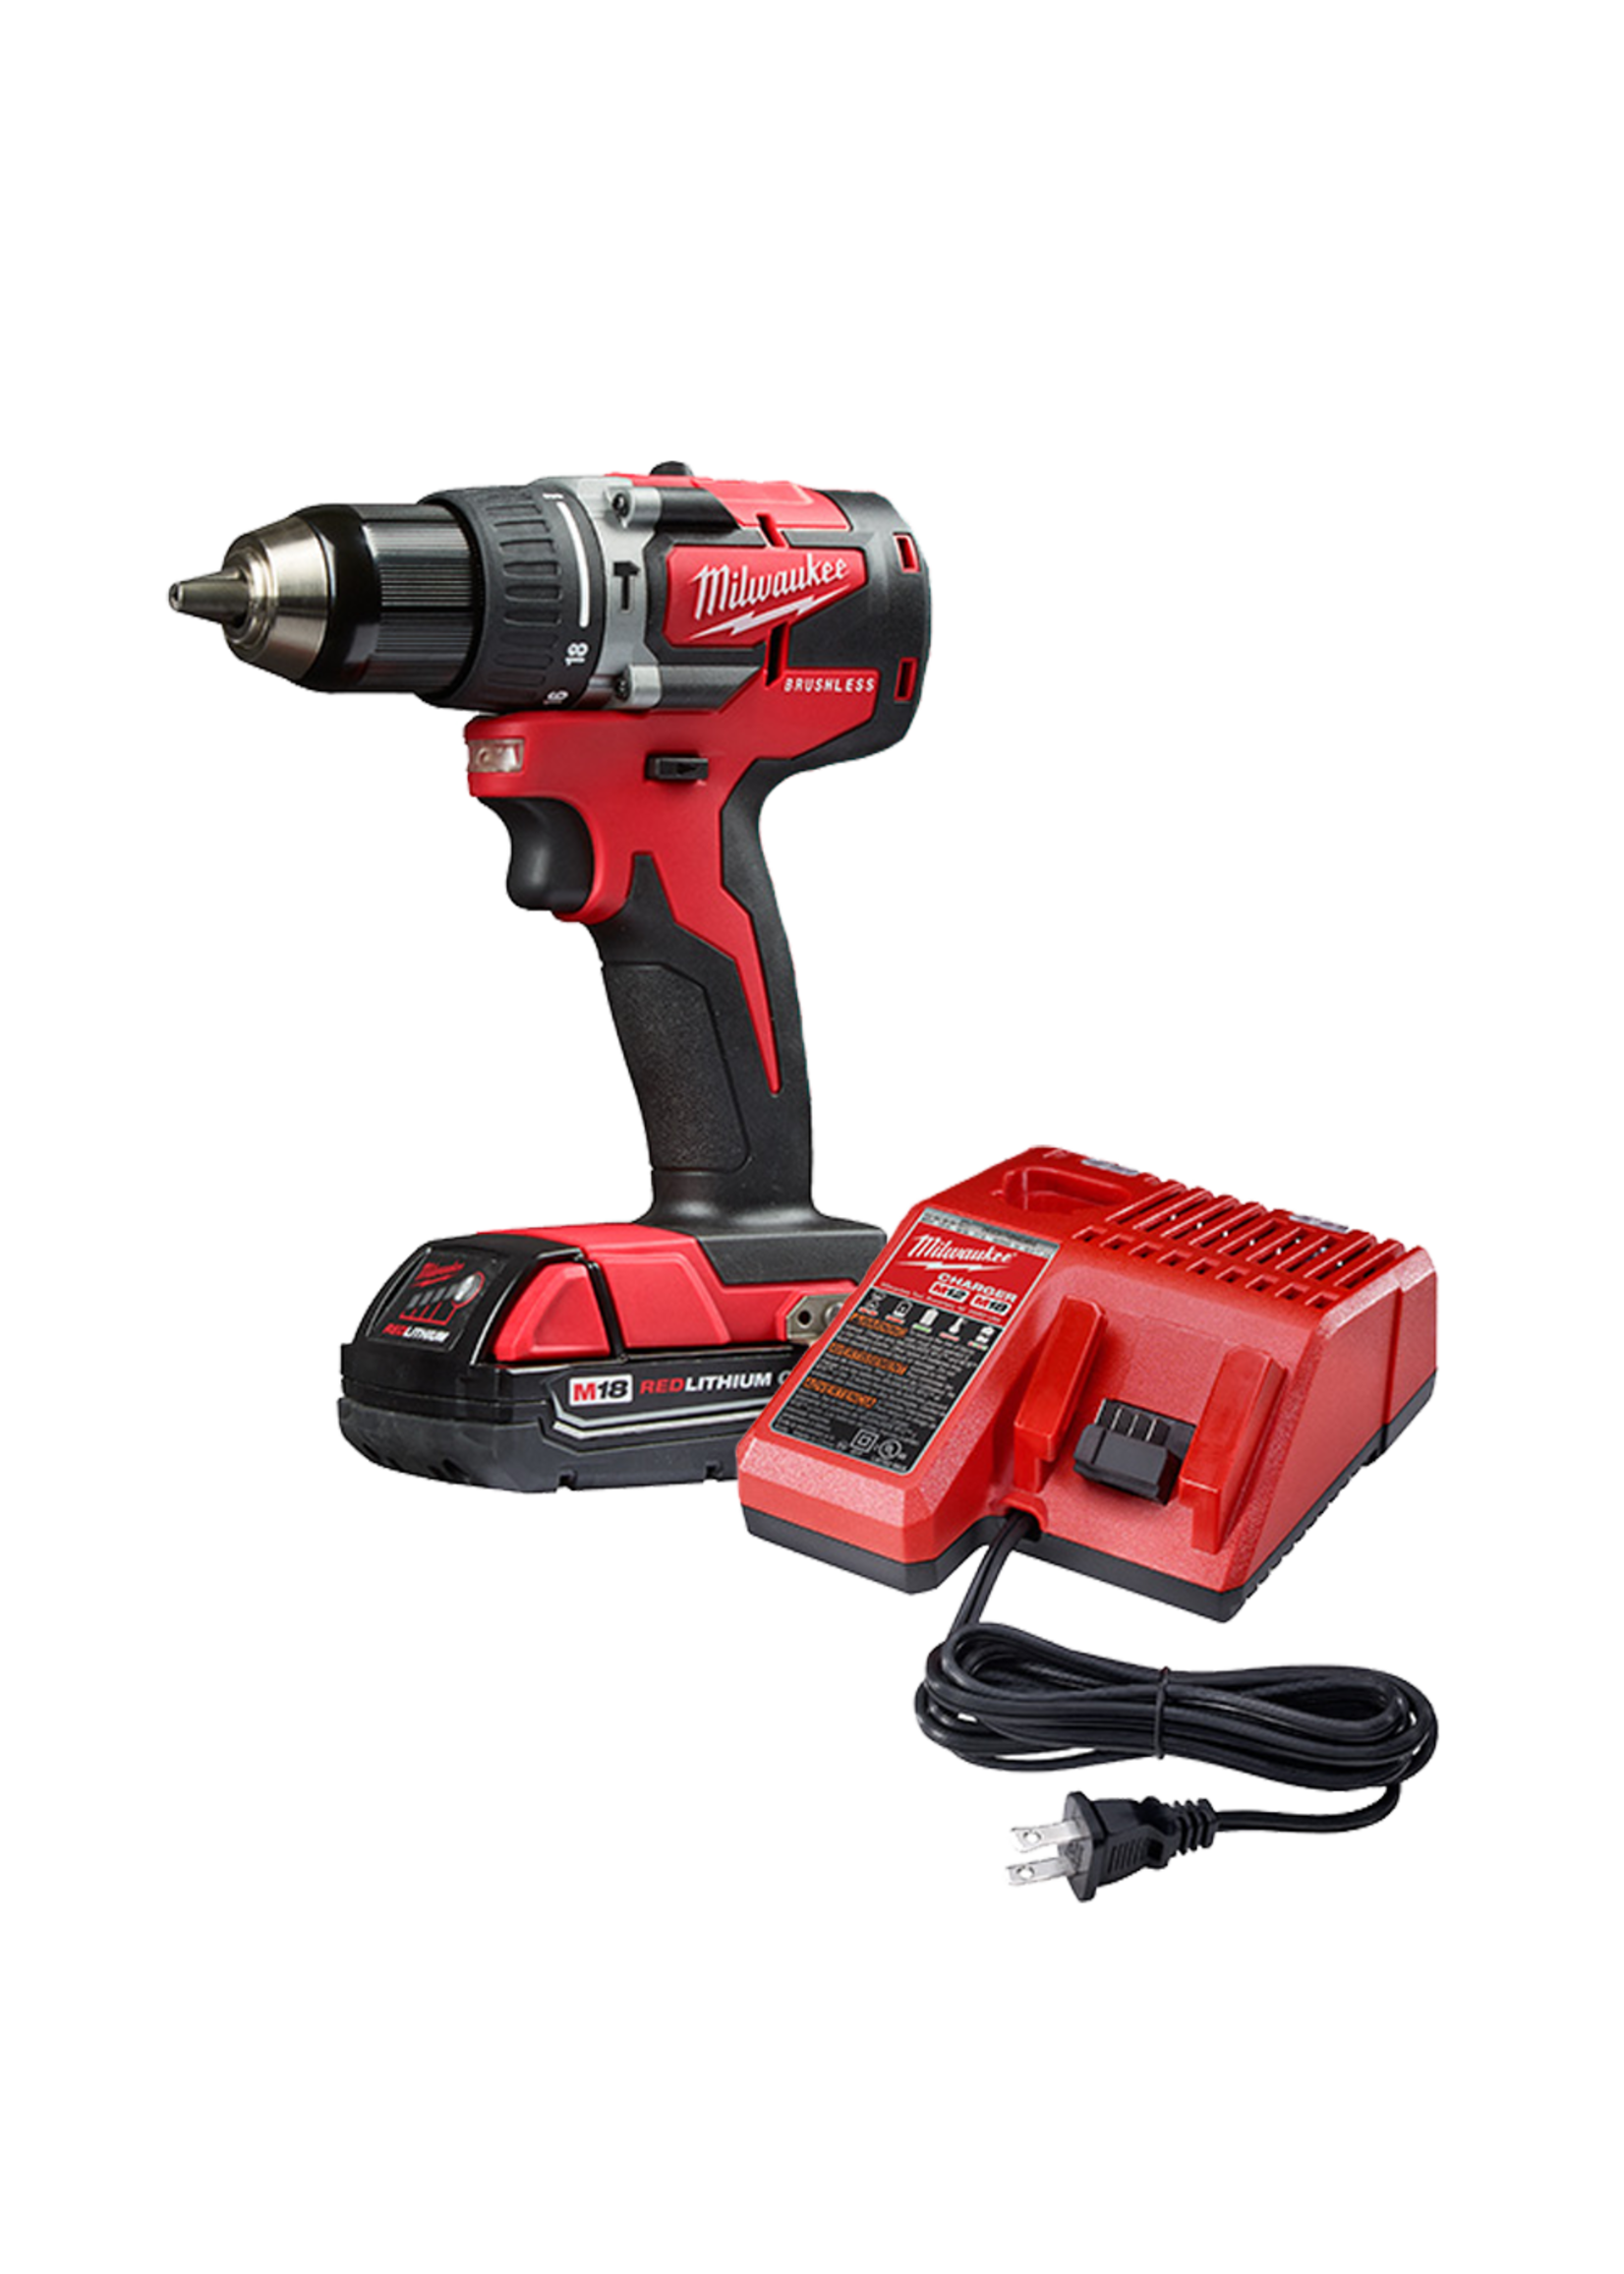 MILWAUKEE Milwaukee  M18 18-Volt Lithium-Ion Brushless Cordless 1/2 in. Compact Hammer Drill/Driver Kit with 2 Batteries, Charger and Case